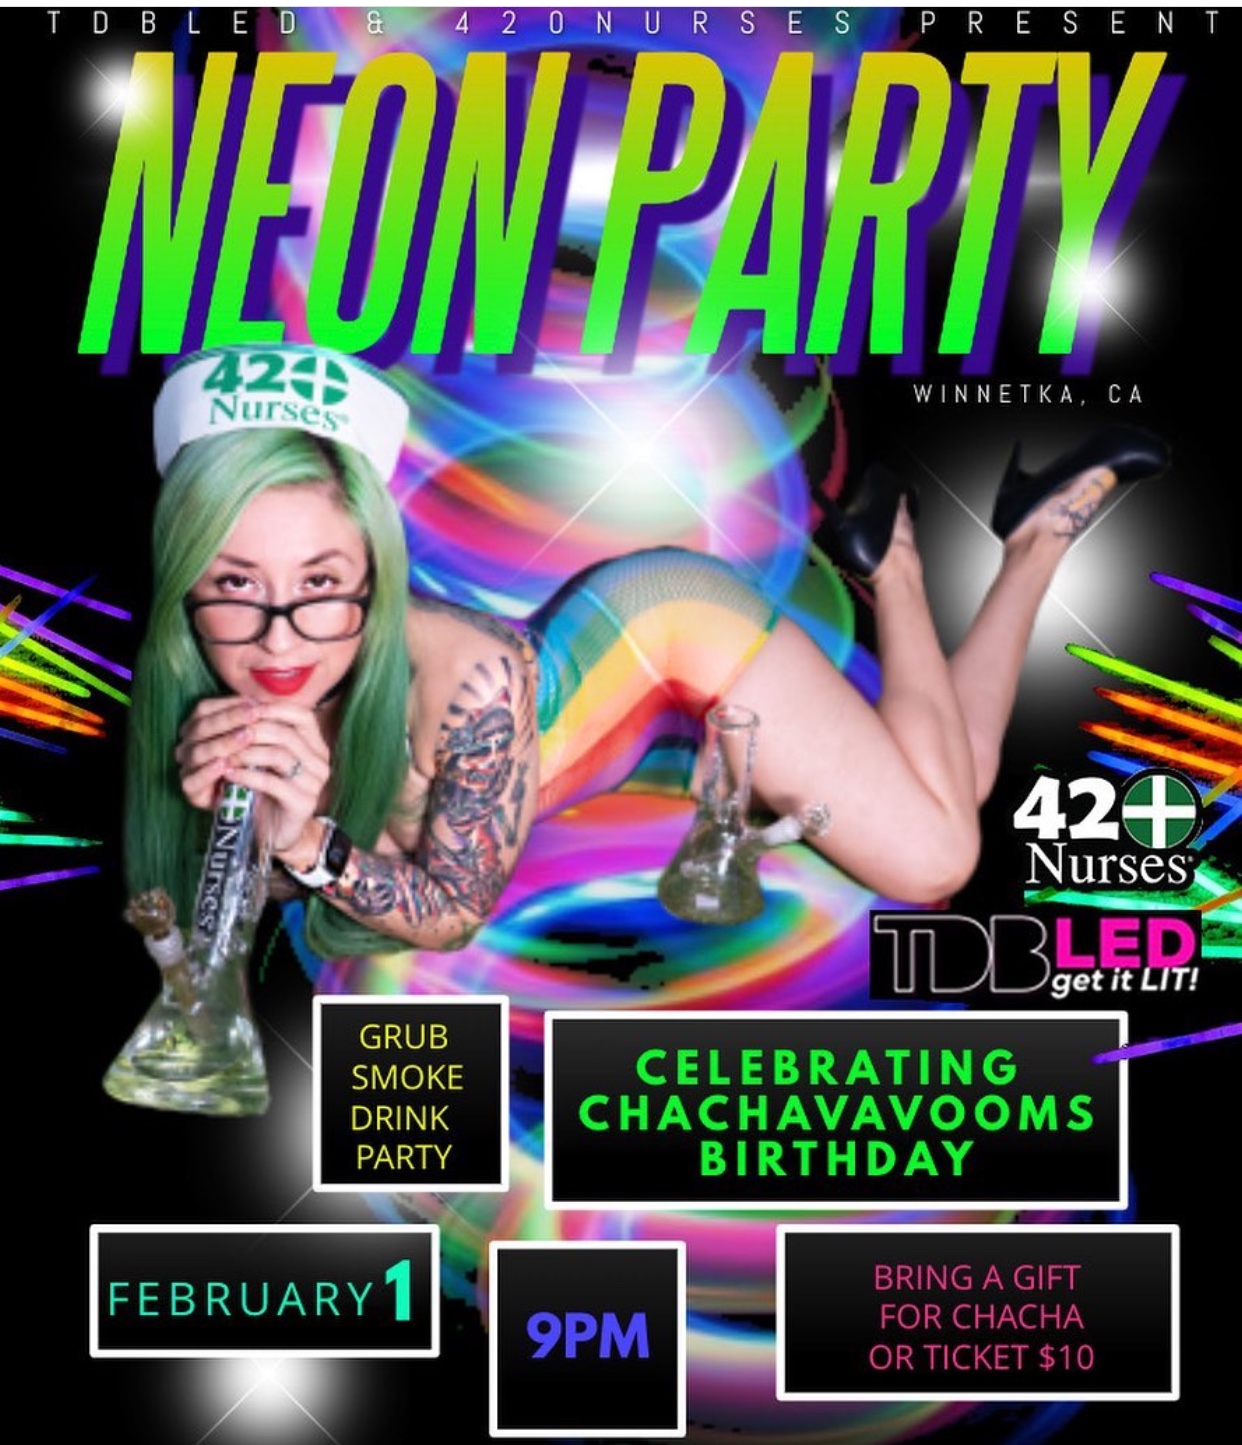 NEON PARTY Celebrating ChaChaVaVooms BIRTHDAY!!!